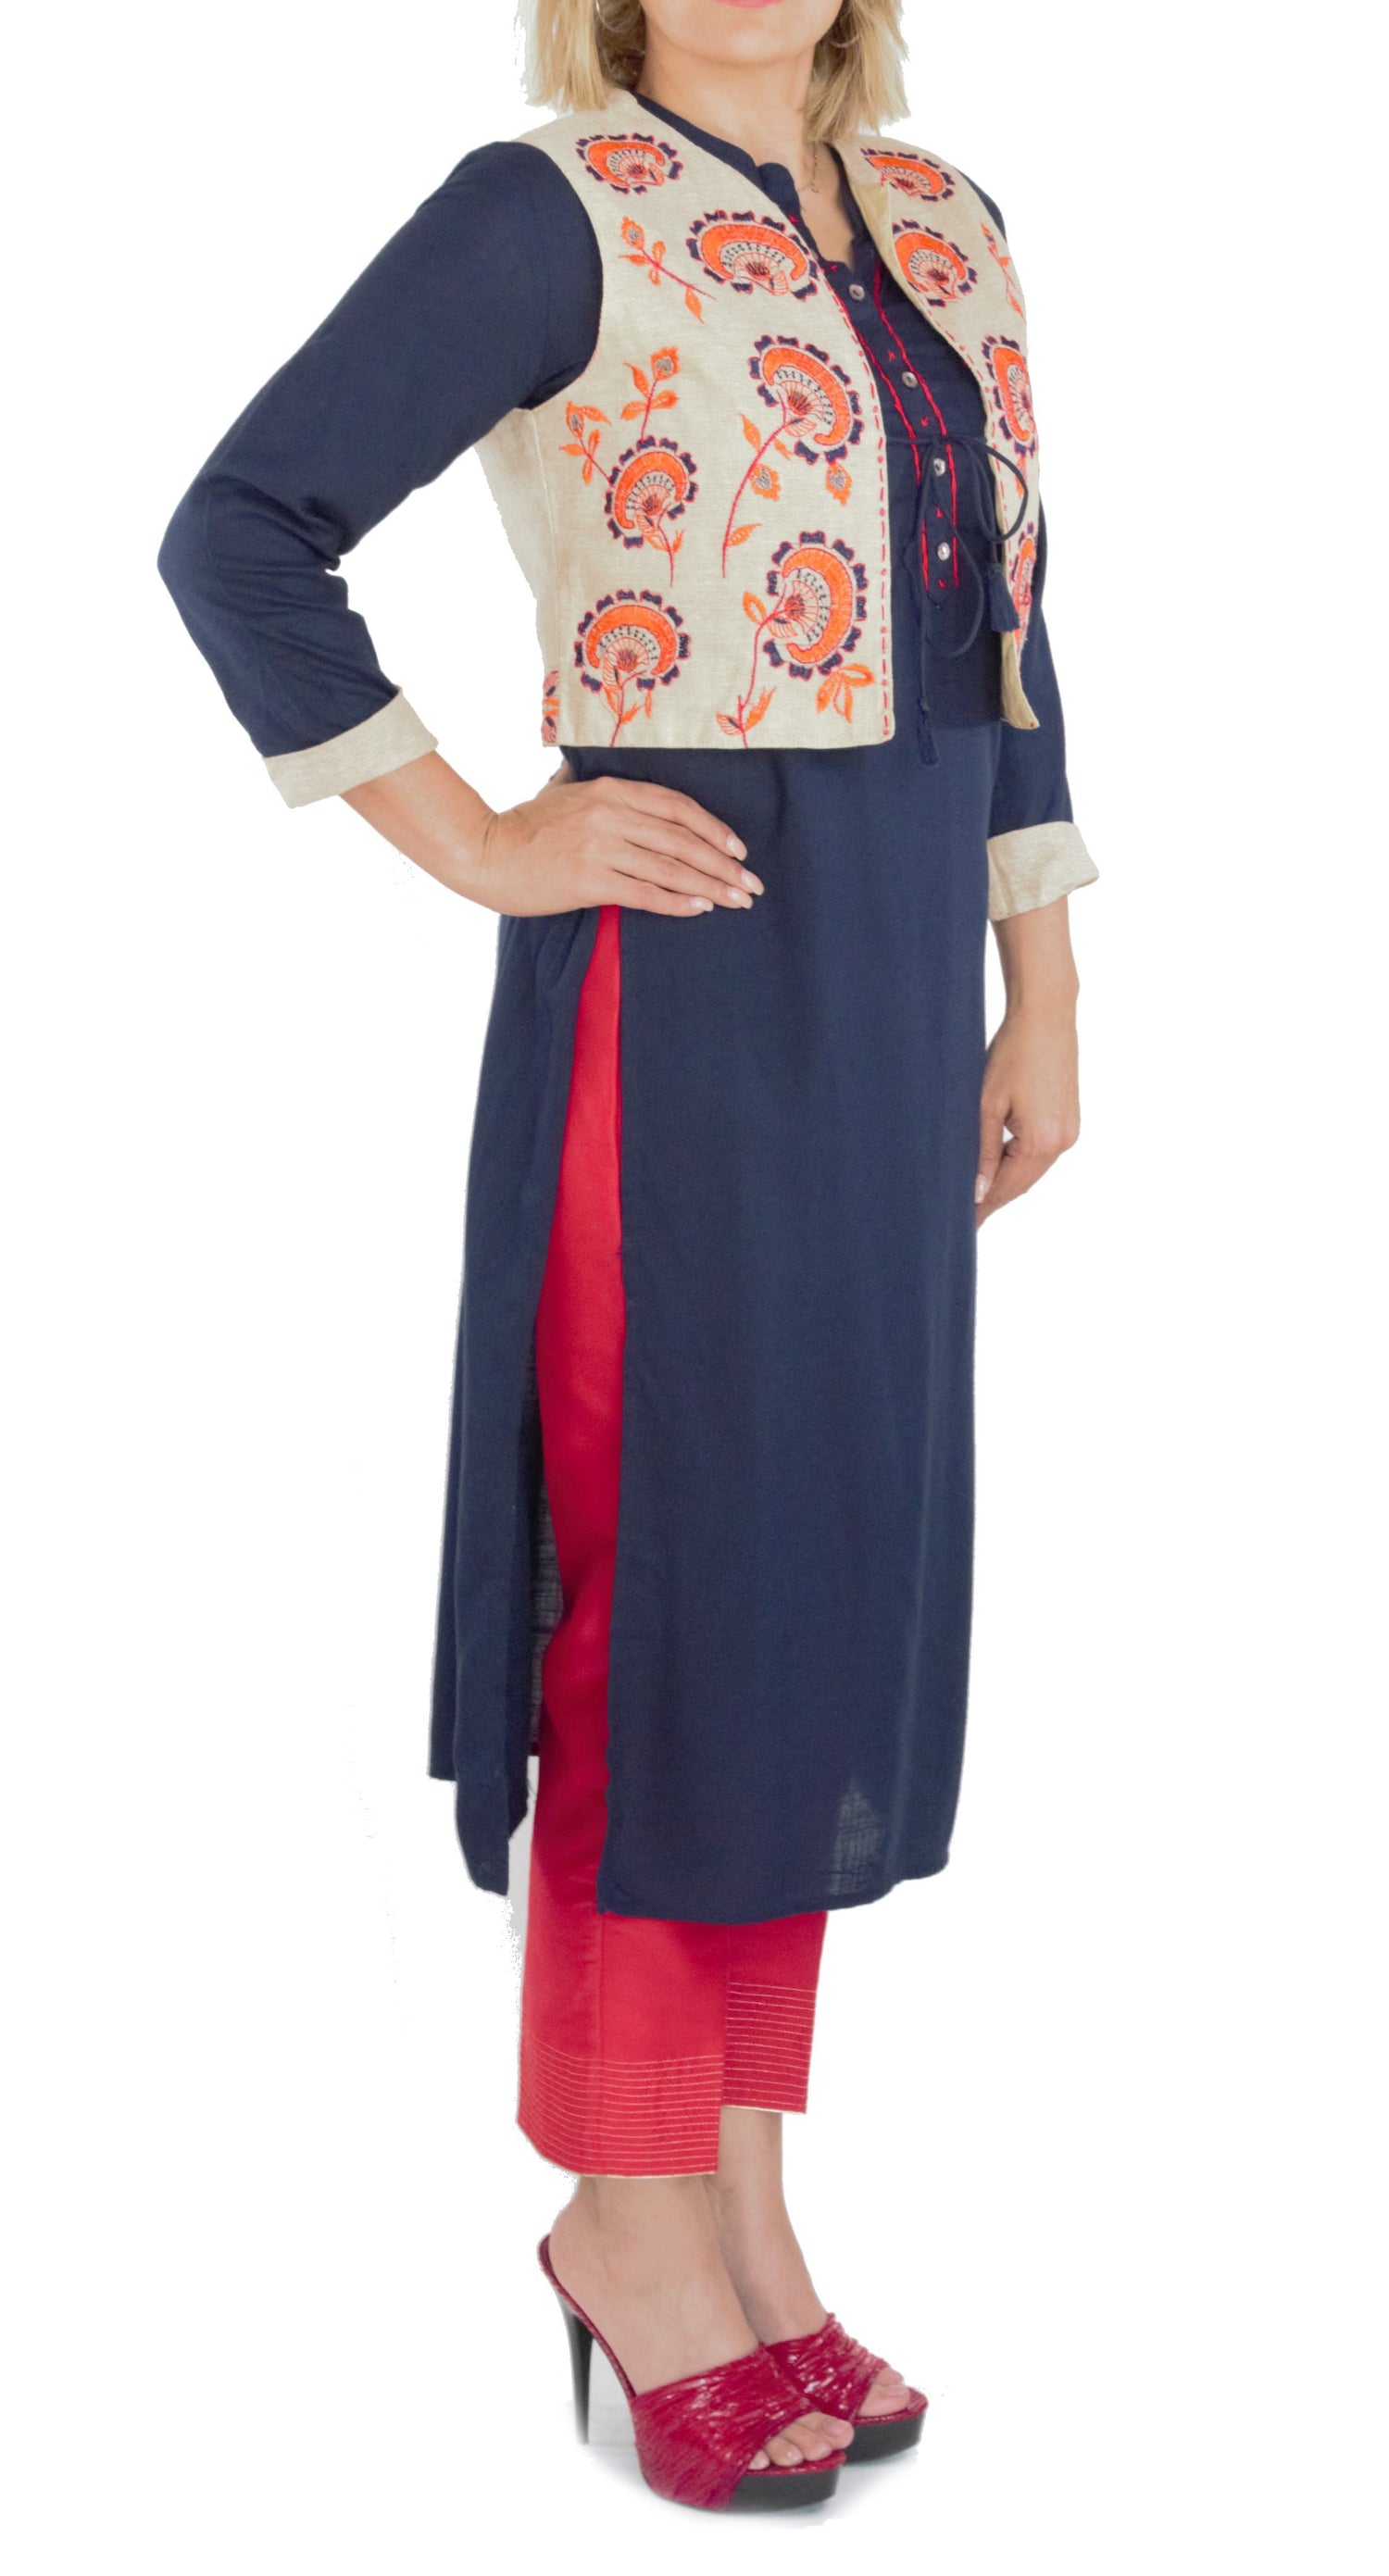 IUGA Polyester Solid Coat - Buy IUGA Polyester Solid Coat Online at Best  Prices in India | Flipkart.com